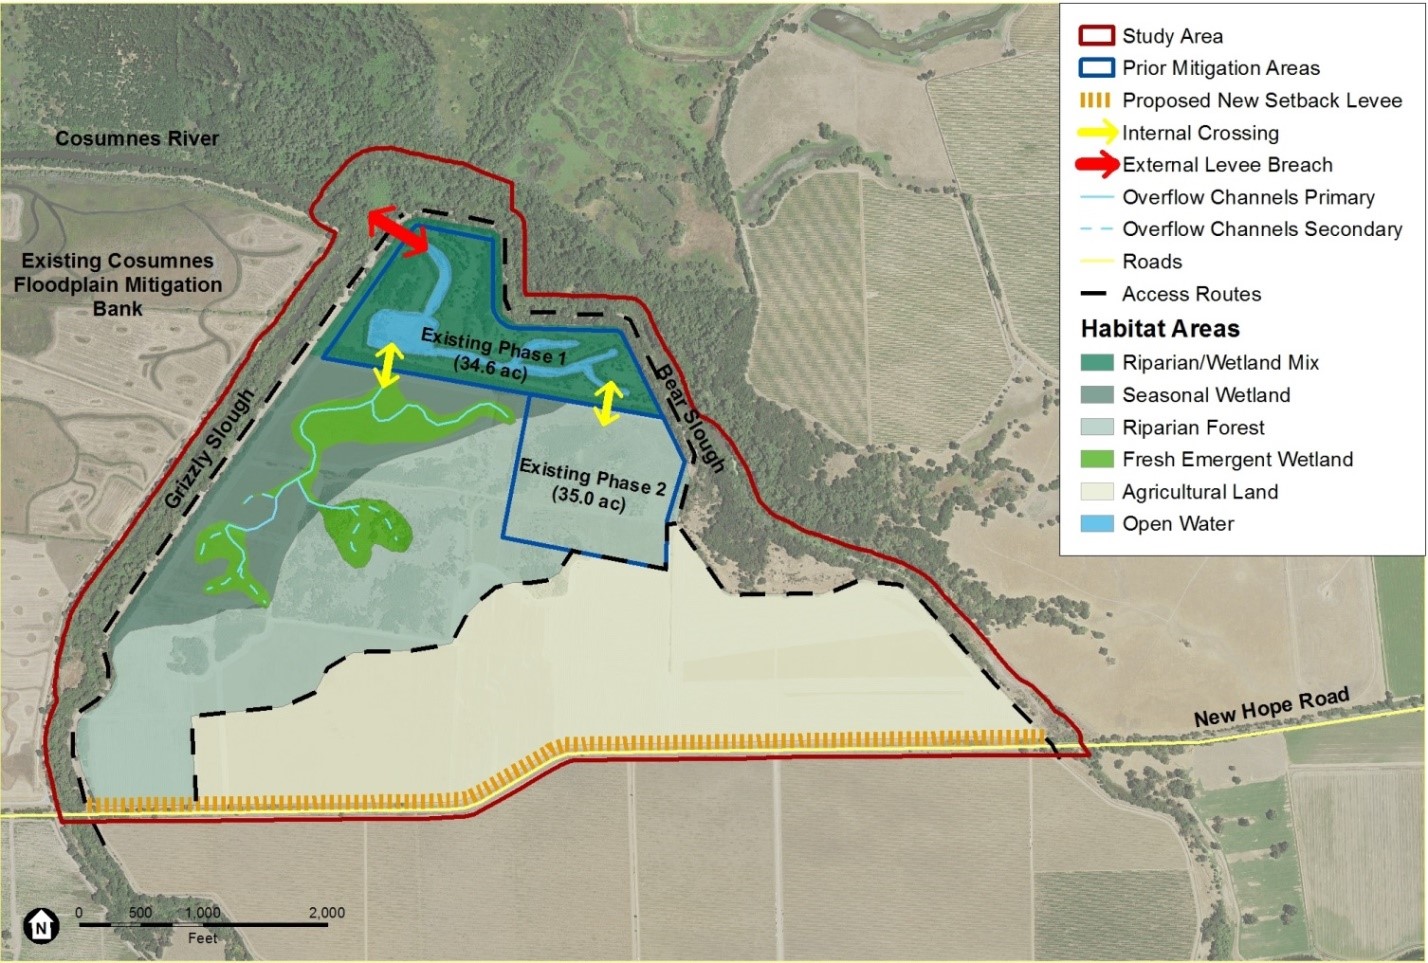 Map showing the habitat areas and the proposed changes to the levee the McCormack-Williamson Tract Levee Modification and Habitat Enhancement Project near Walnut Grove, California. For more information, contact the program manager, Anitra Pawley, by email at anitra.pawley@water.ca.gov.